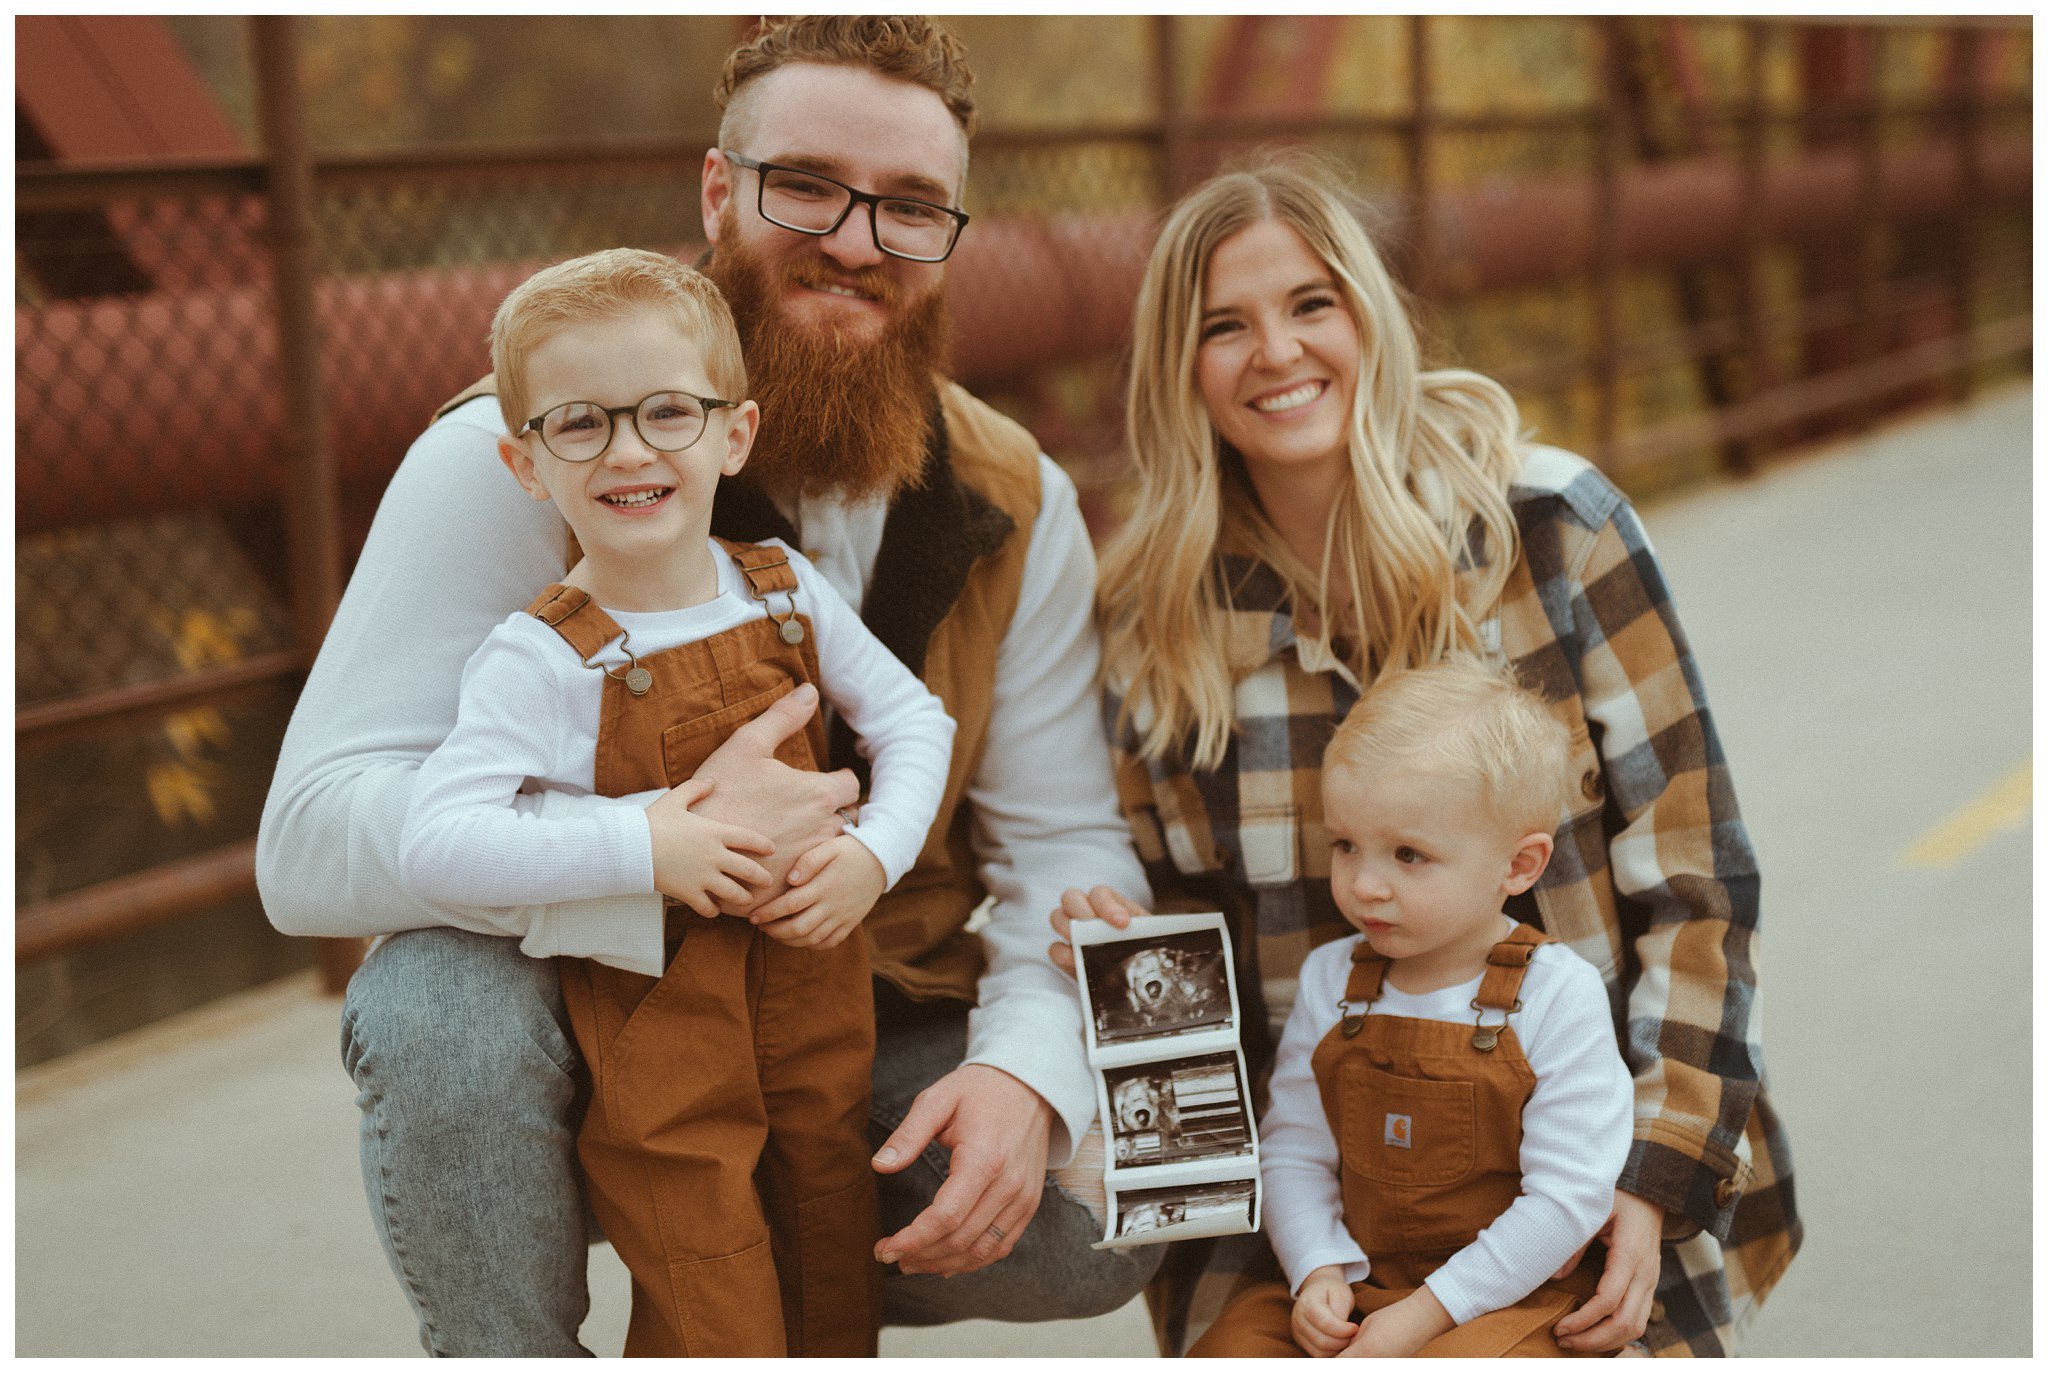 Black Family Fall Family Session and Pregnancy Announcement in Boise, ID at Idaho Fallen Firefighters Memorial Park